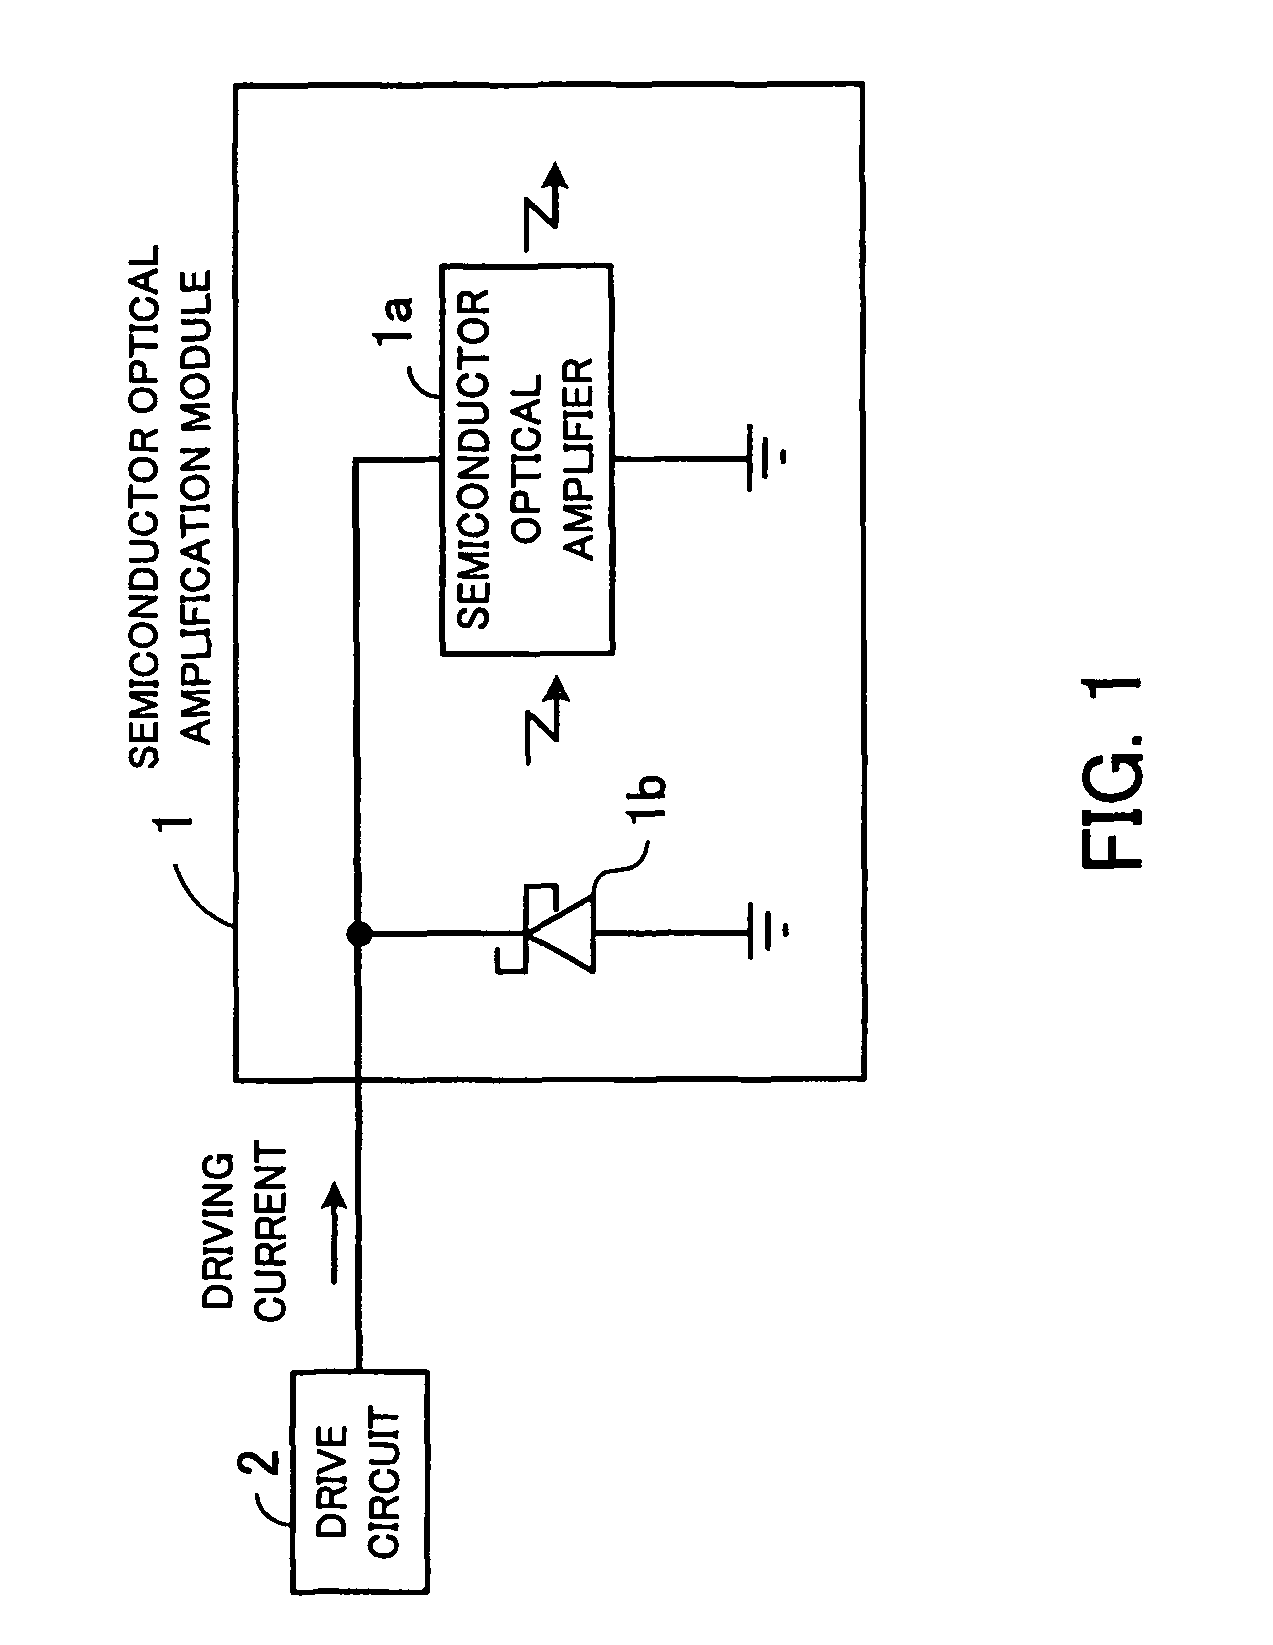 Semiconductor optical amplification module, optical matrix switching device, and drive circuit